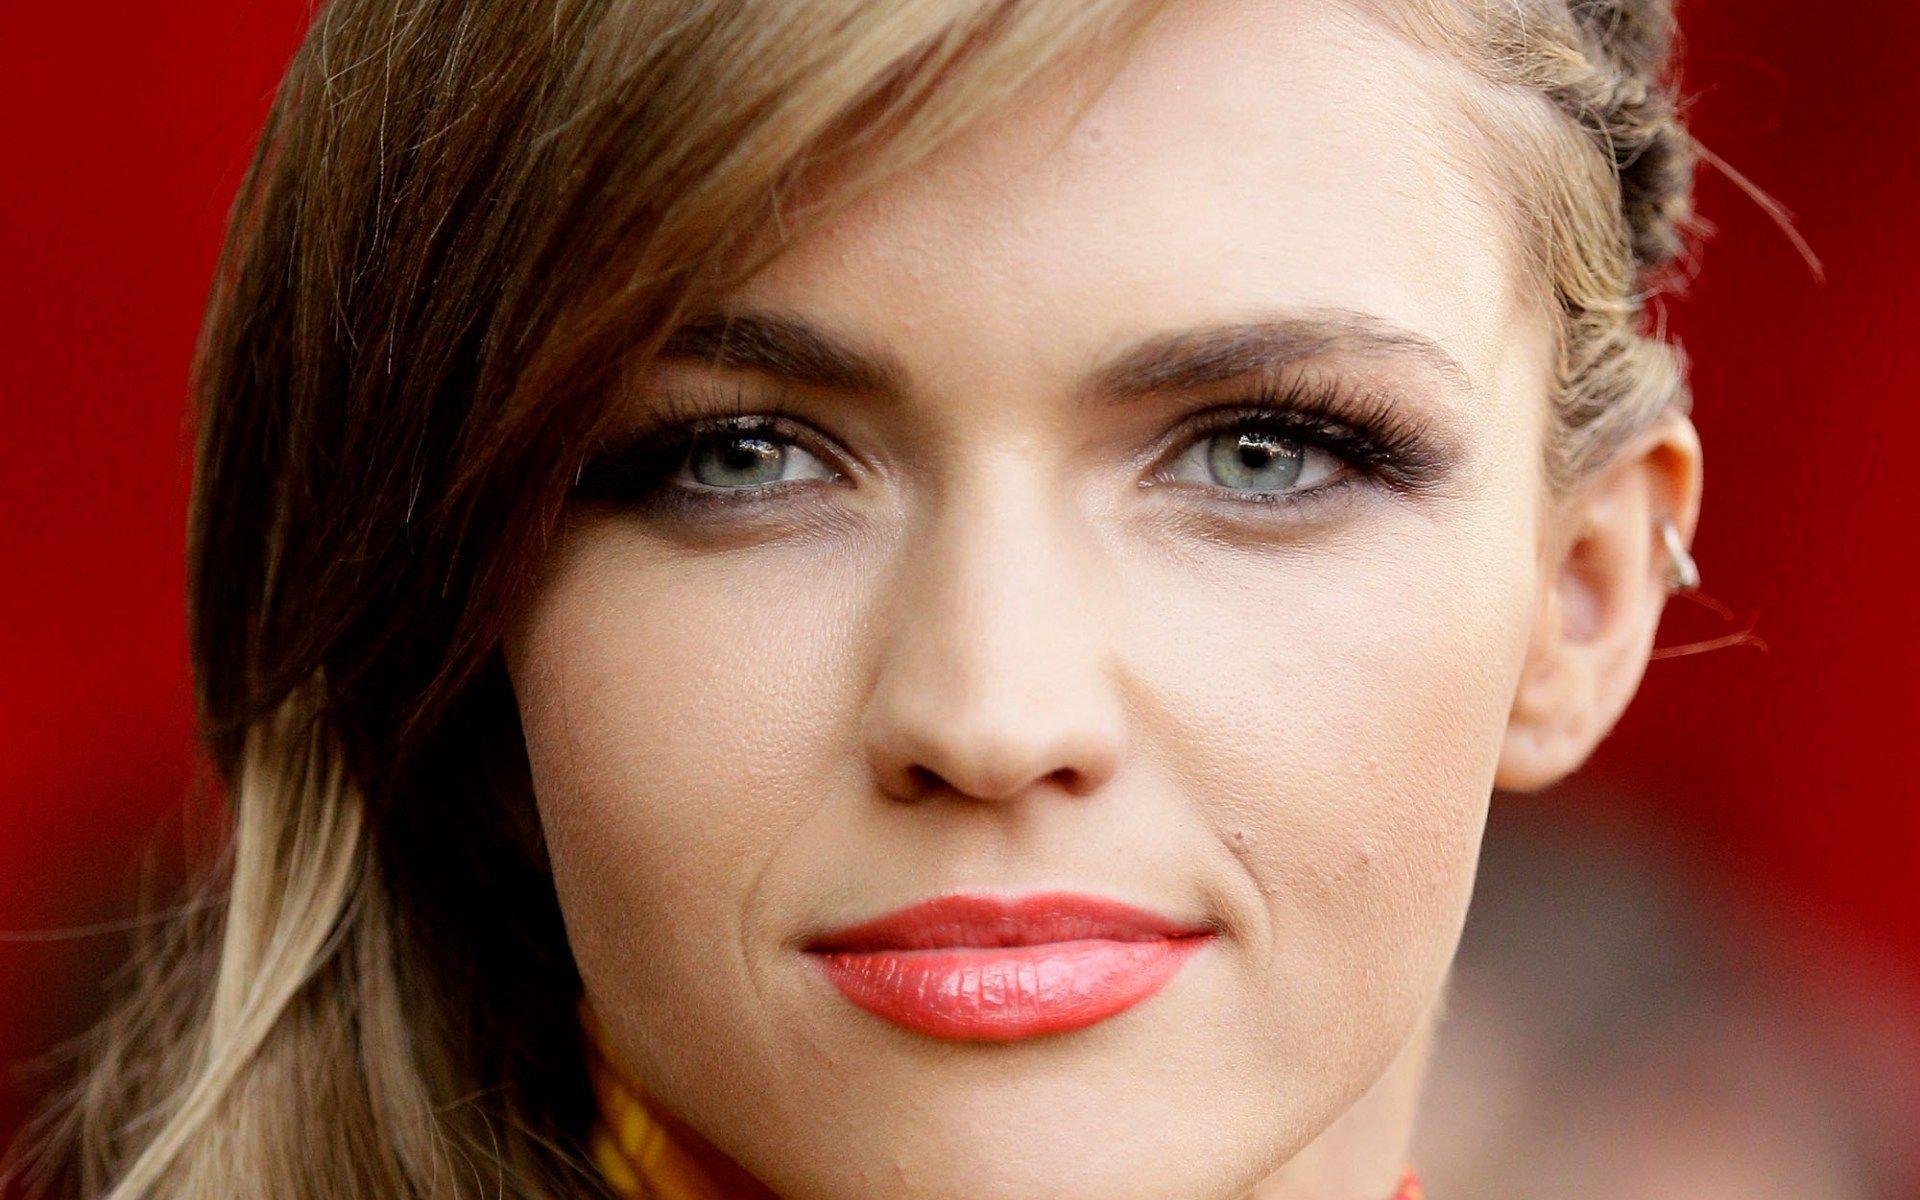 Cute Smile of Ruby Rose HD Image. Famous HD Wallpaper